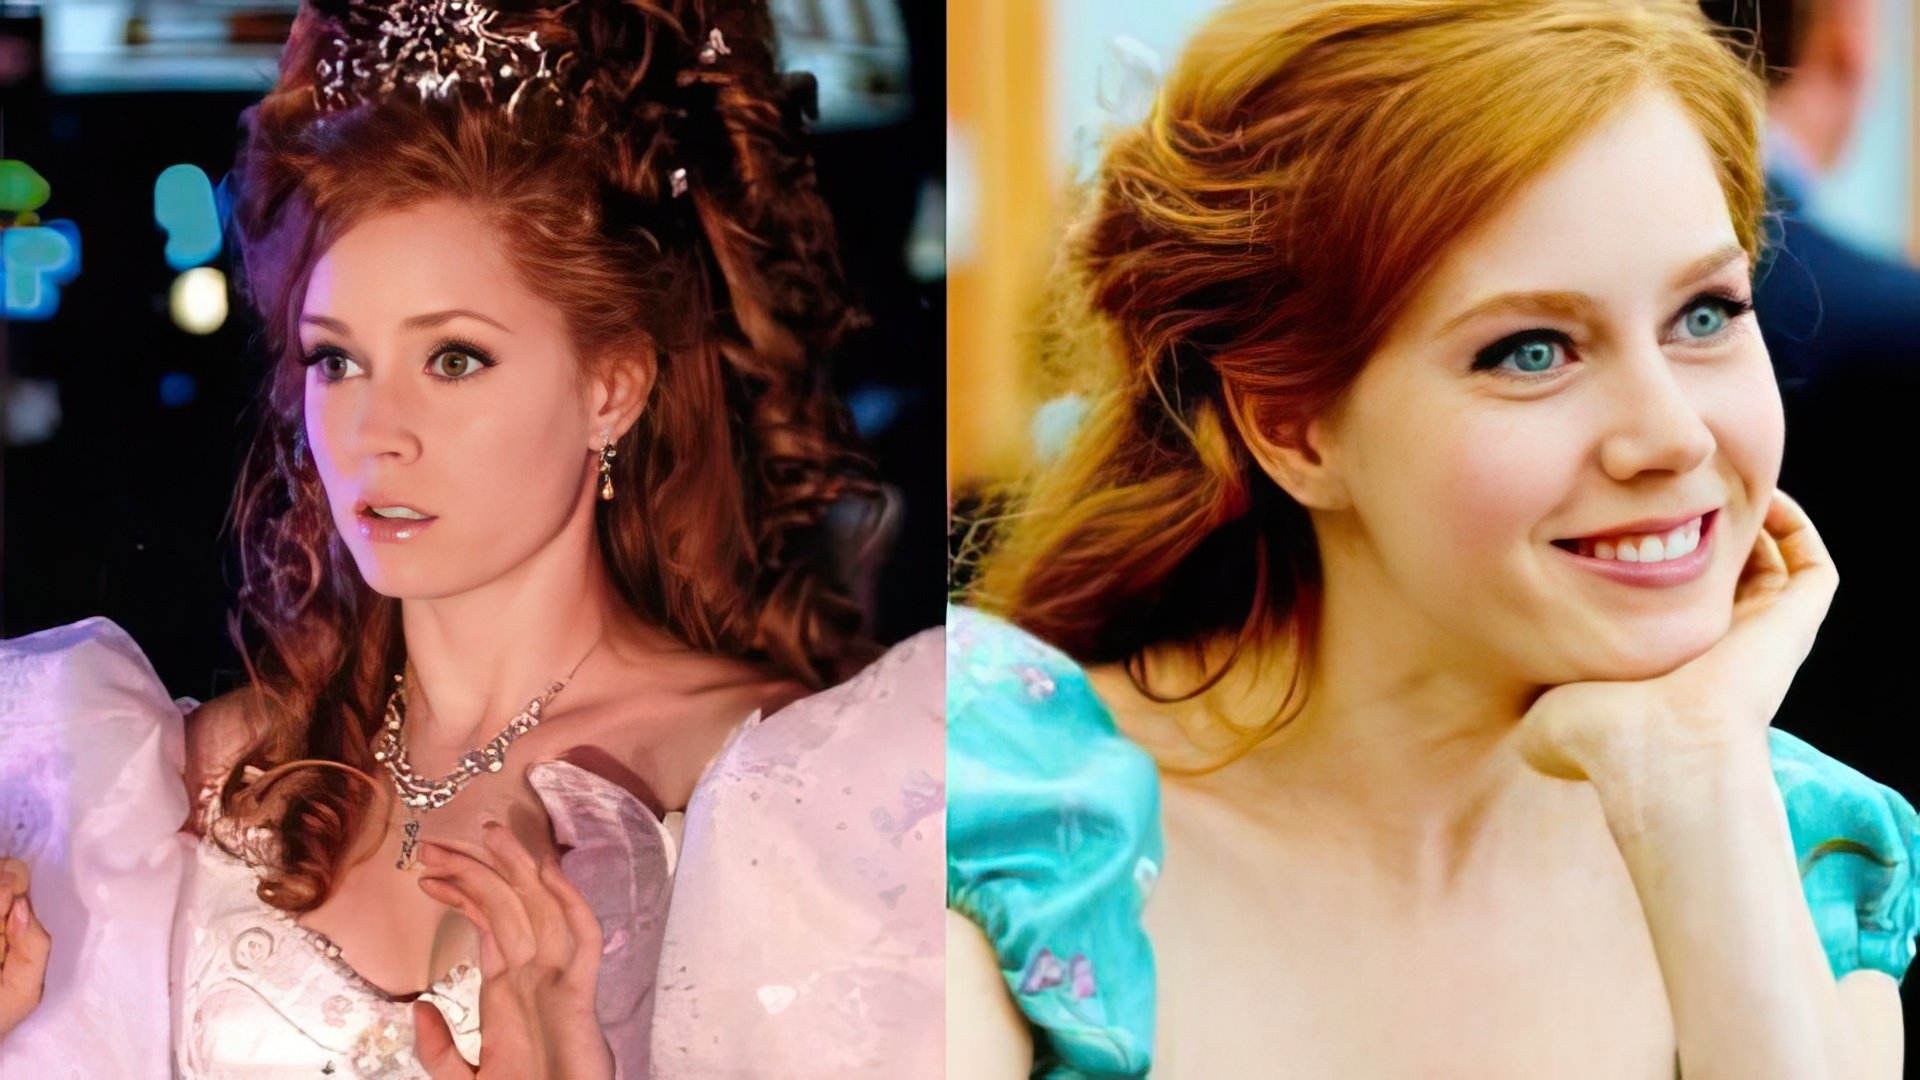 Amy in the role of Princess Giselle